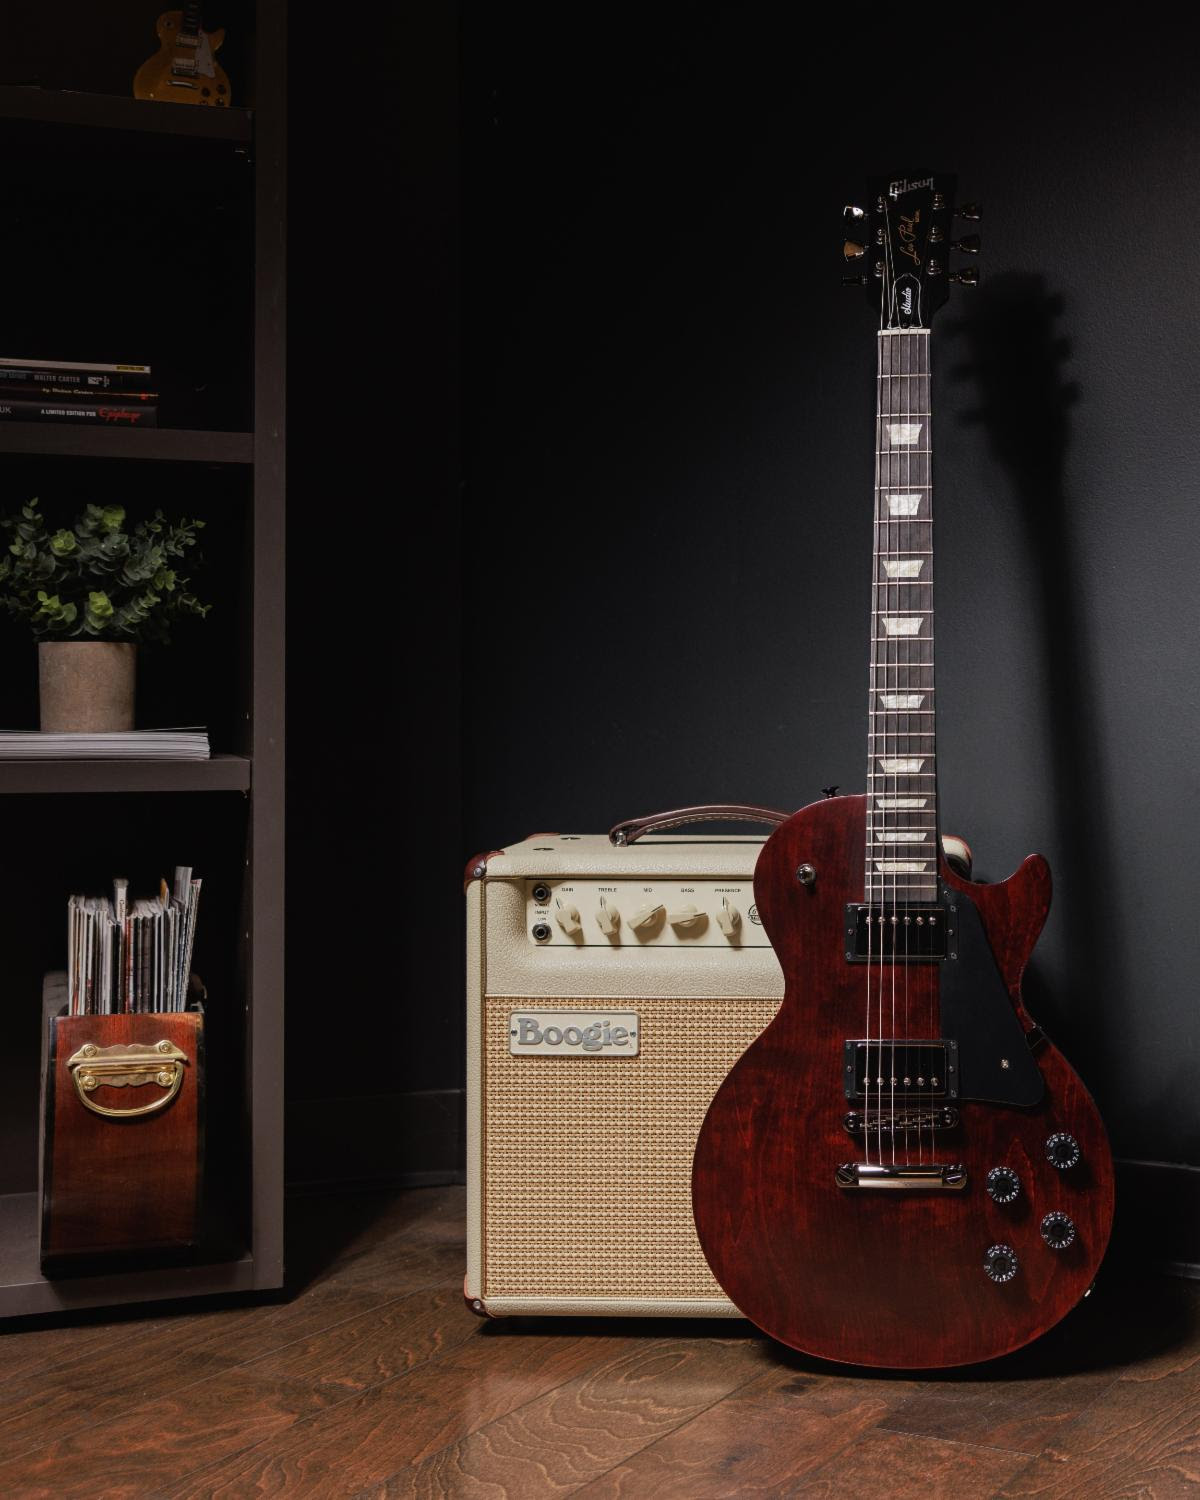 Above: Gibson Les Paul Modern Studio in Wine Red Satin.